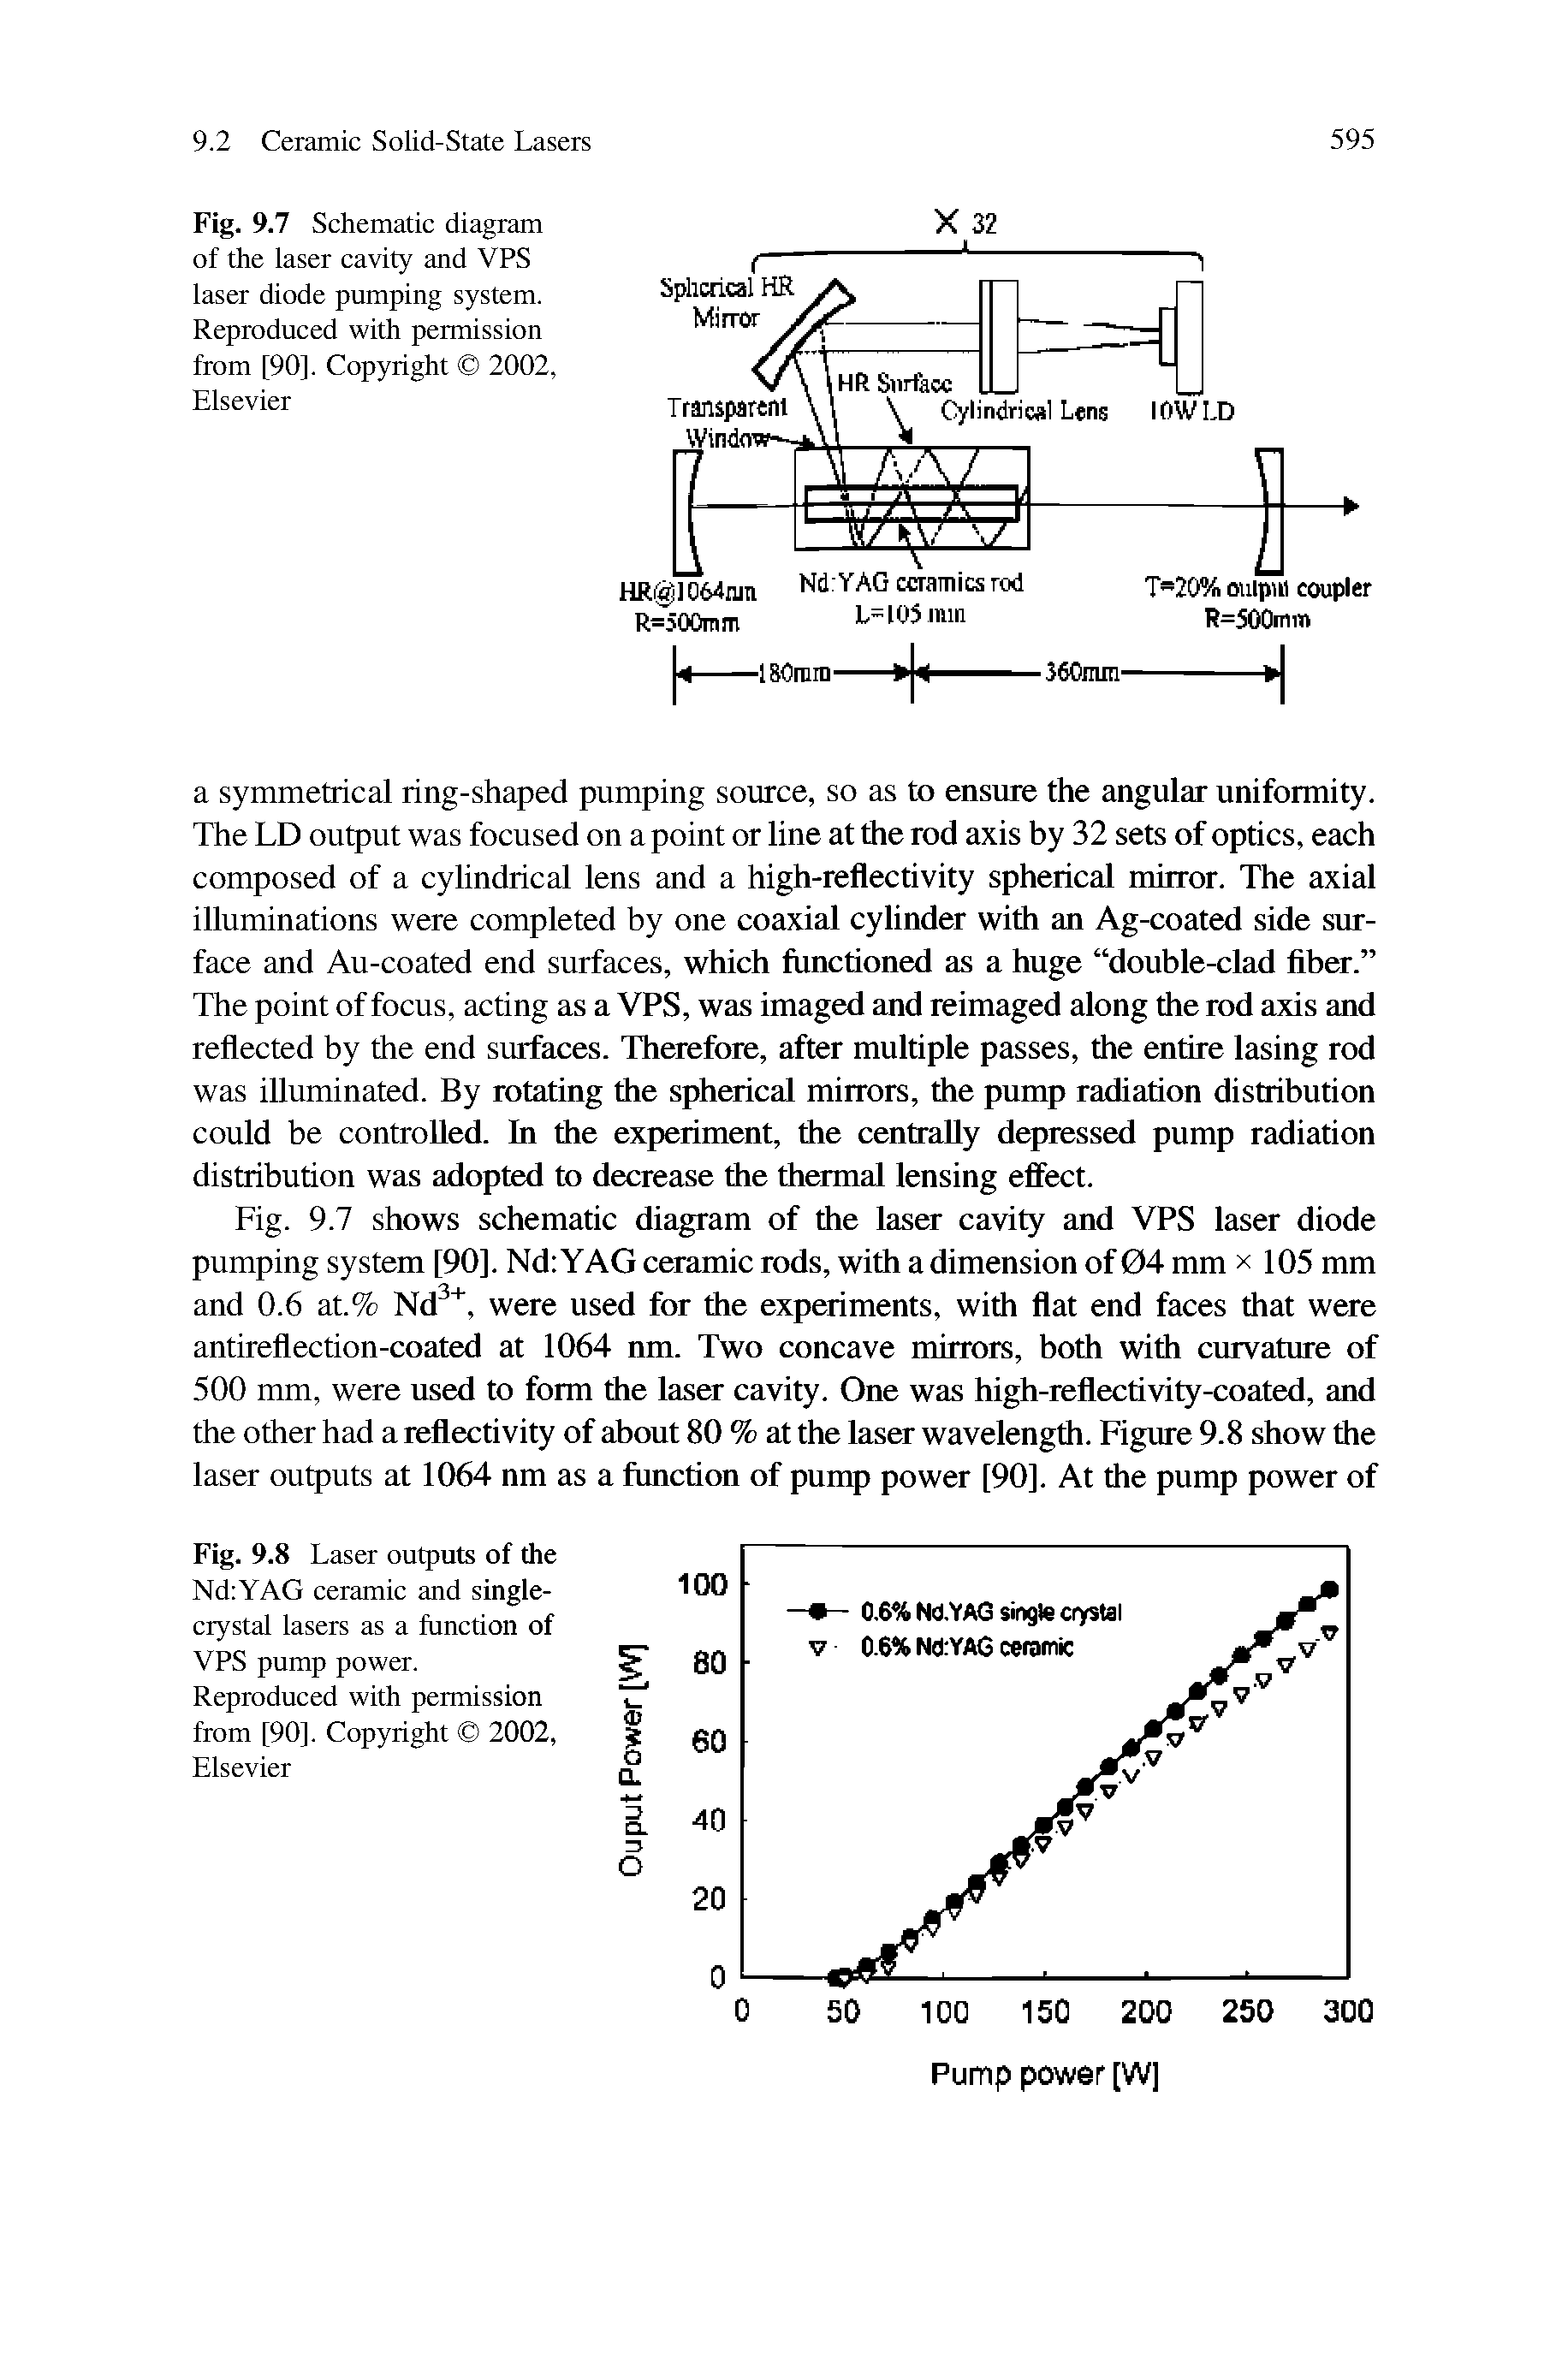 Fig. 9.7 Schematic diagram of the laser cavity and VPS laser diode pumping system. Reproduced with permission from [90]. Copyright 2002, Elsevier...